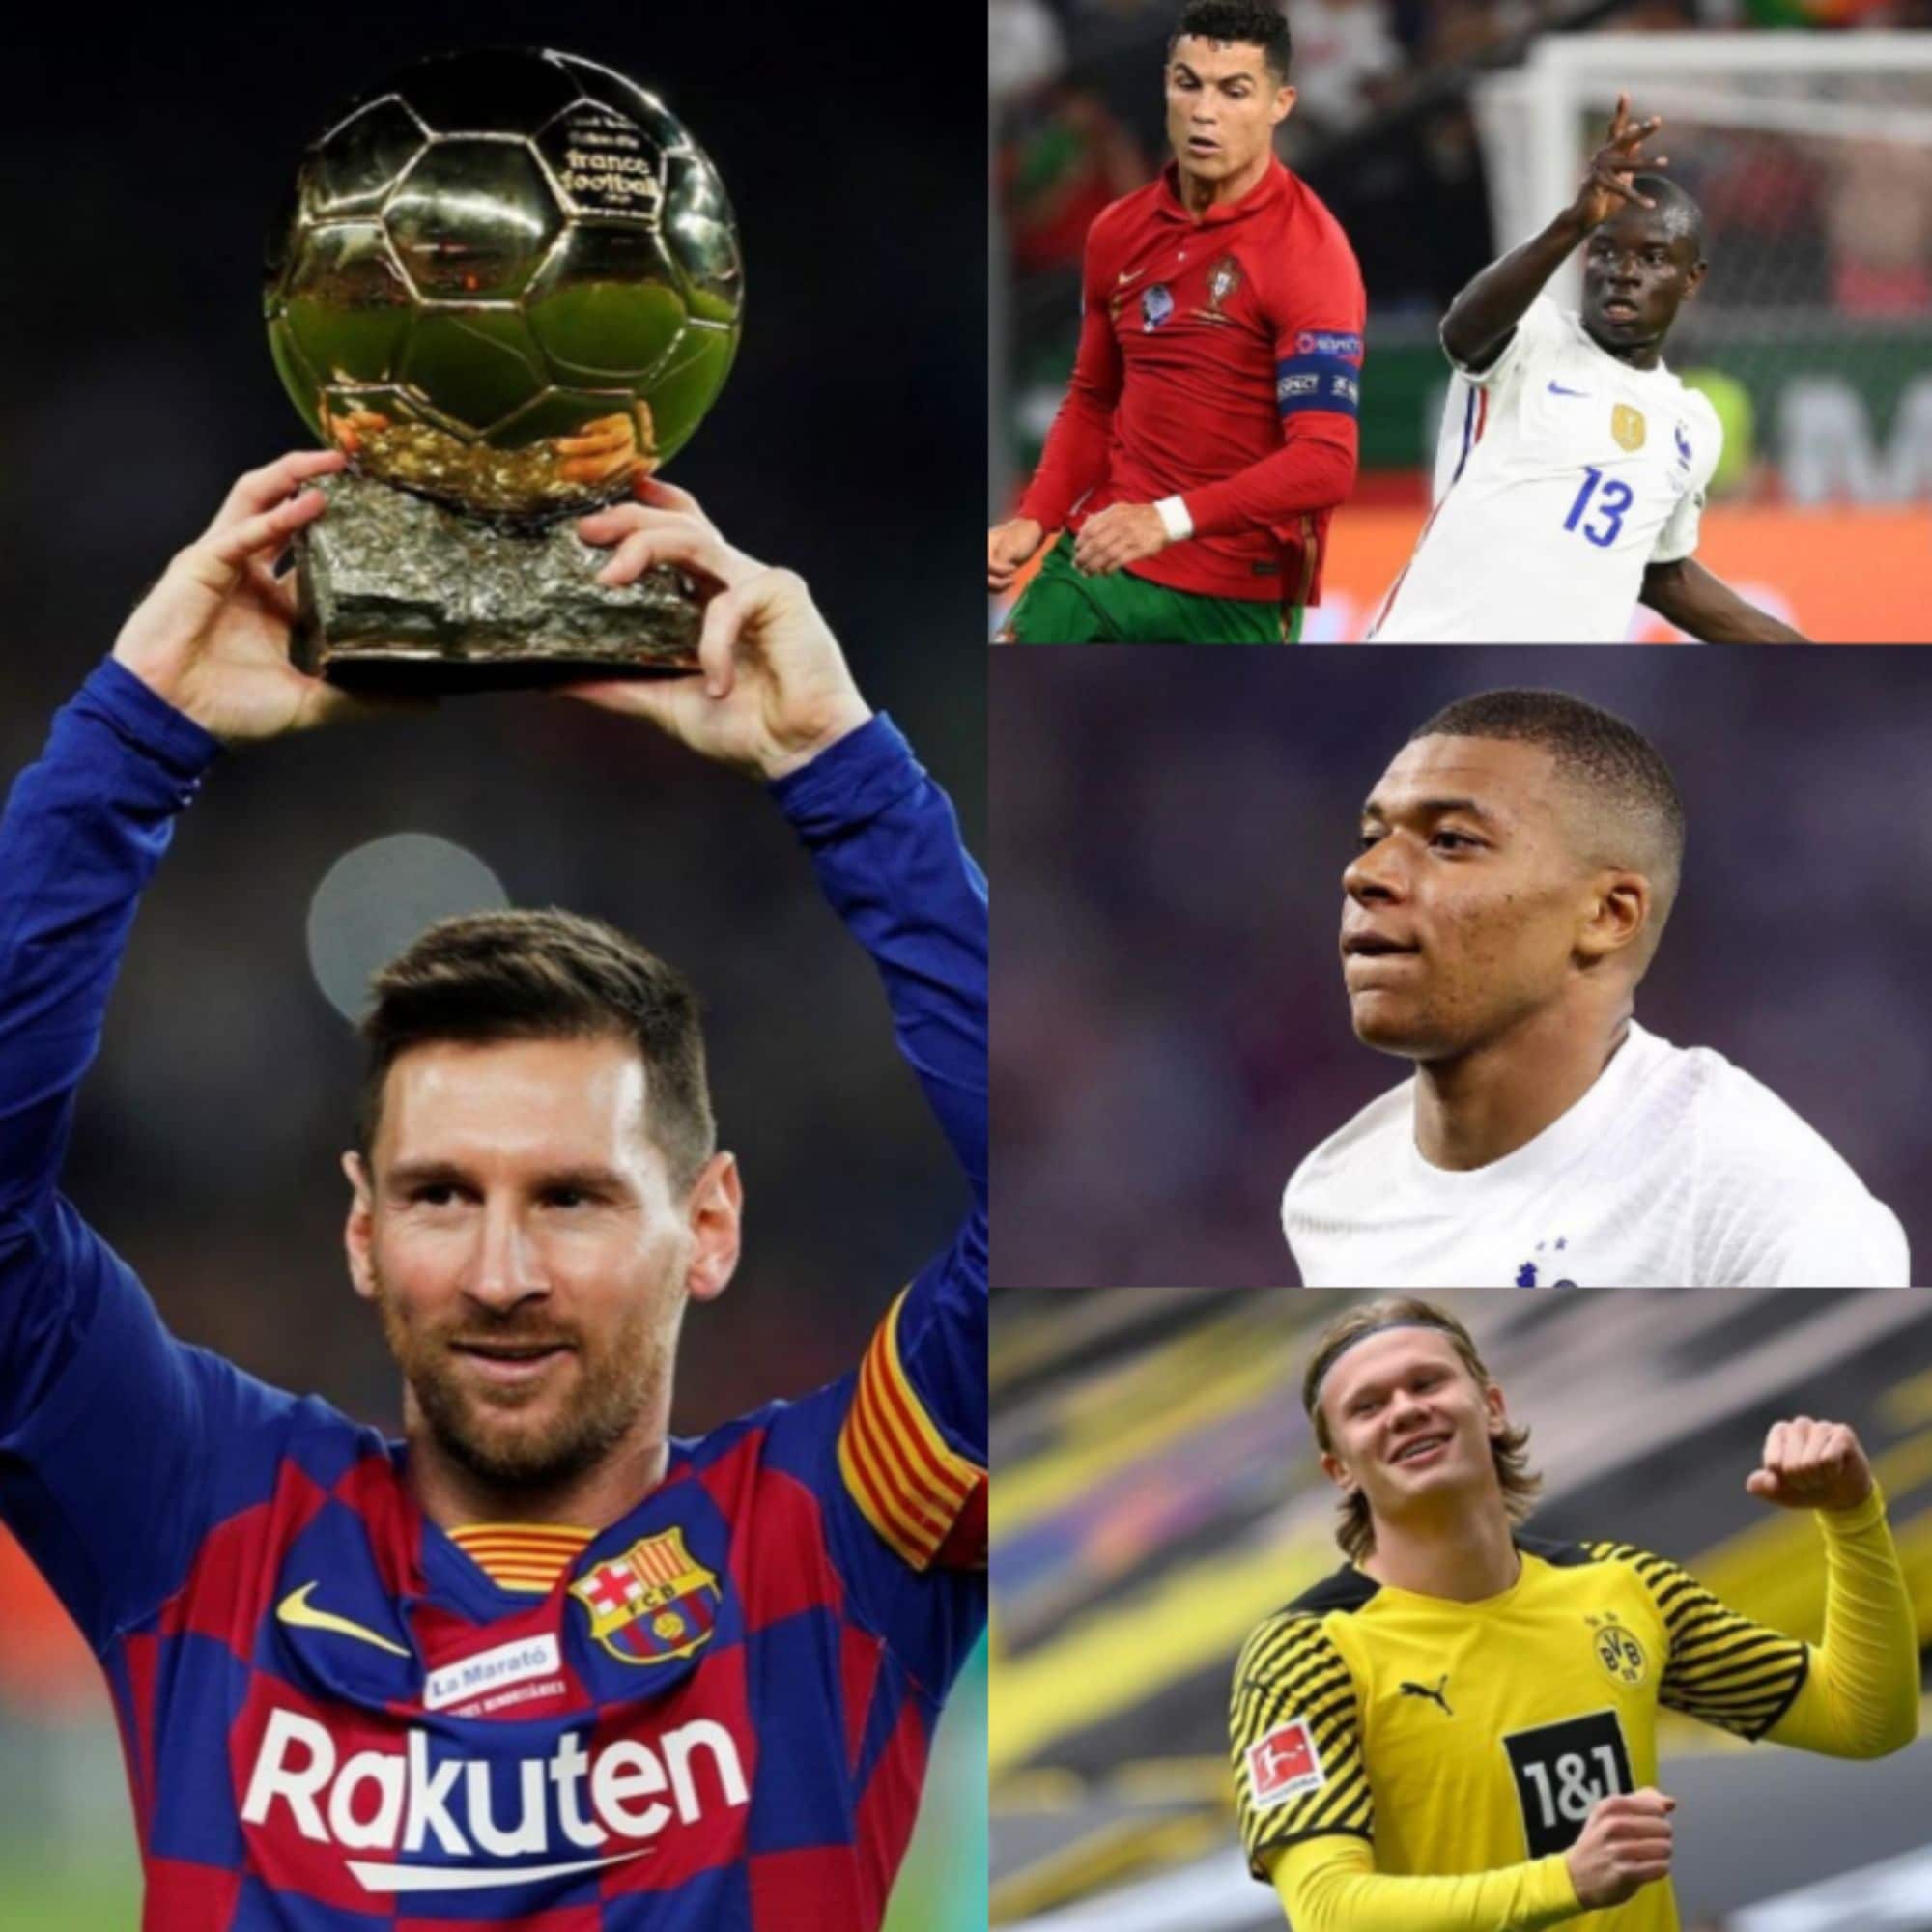 Ballon d’Or 2021: All Eyes On Newcomers – Kante, Mappe, Haaland To Challenge Messi